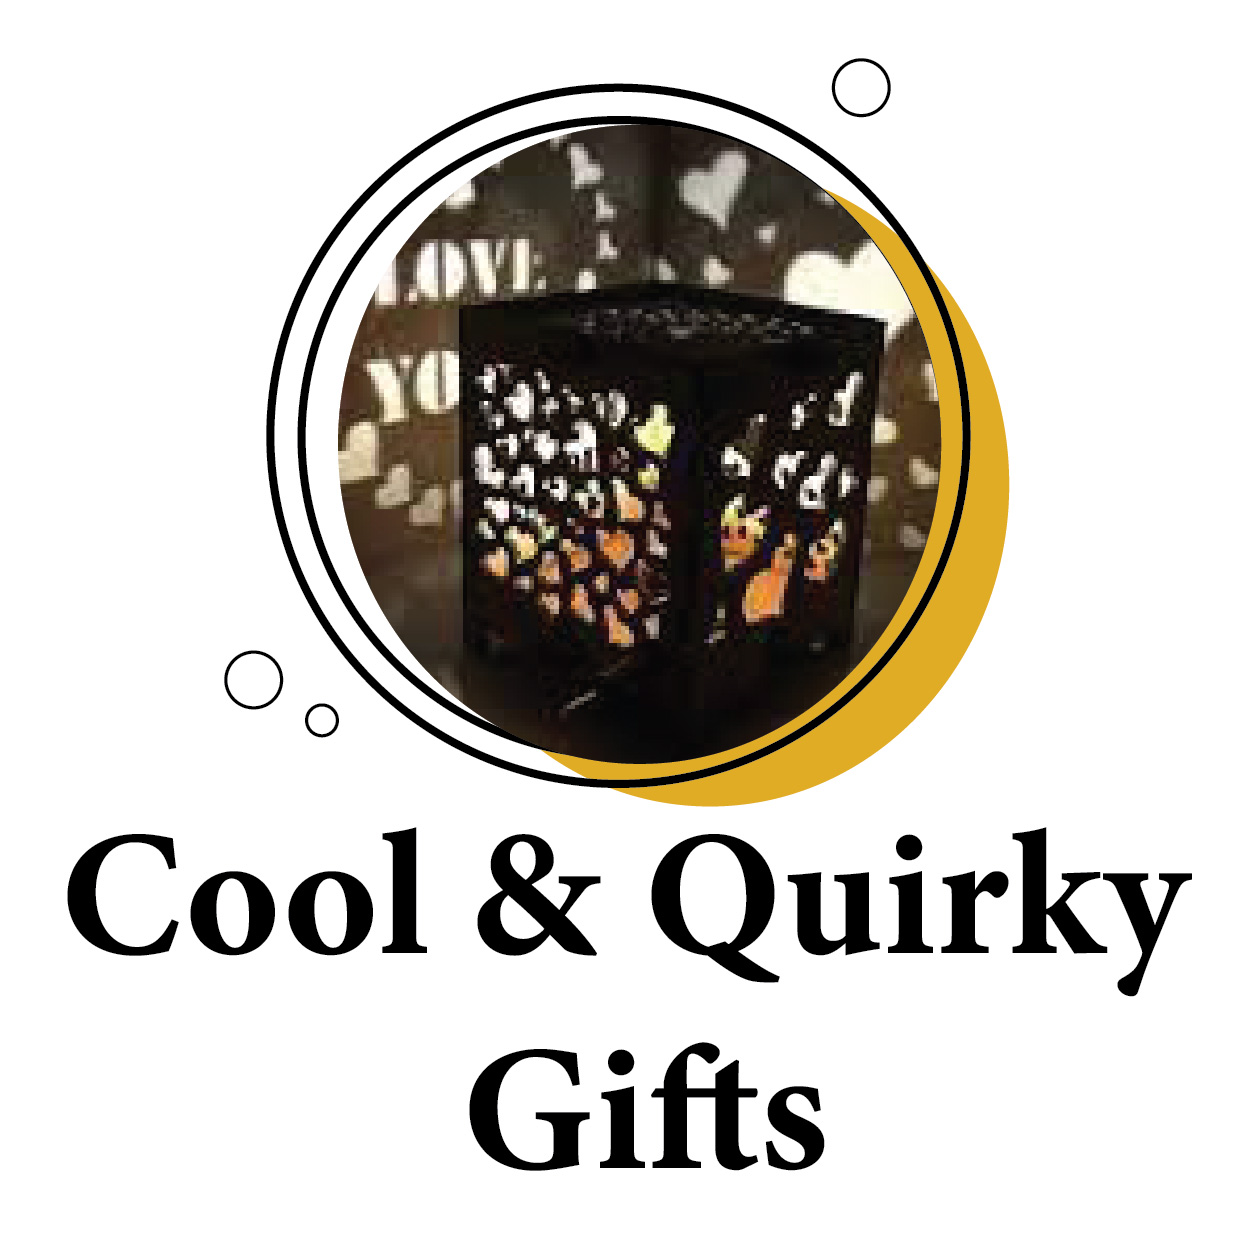 Cool & Quirky Gifts